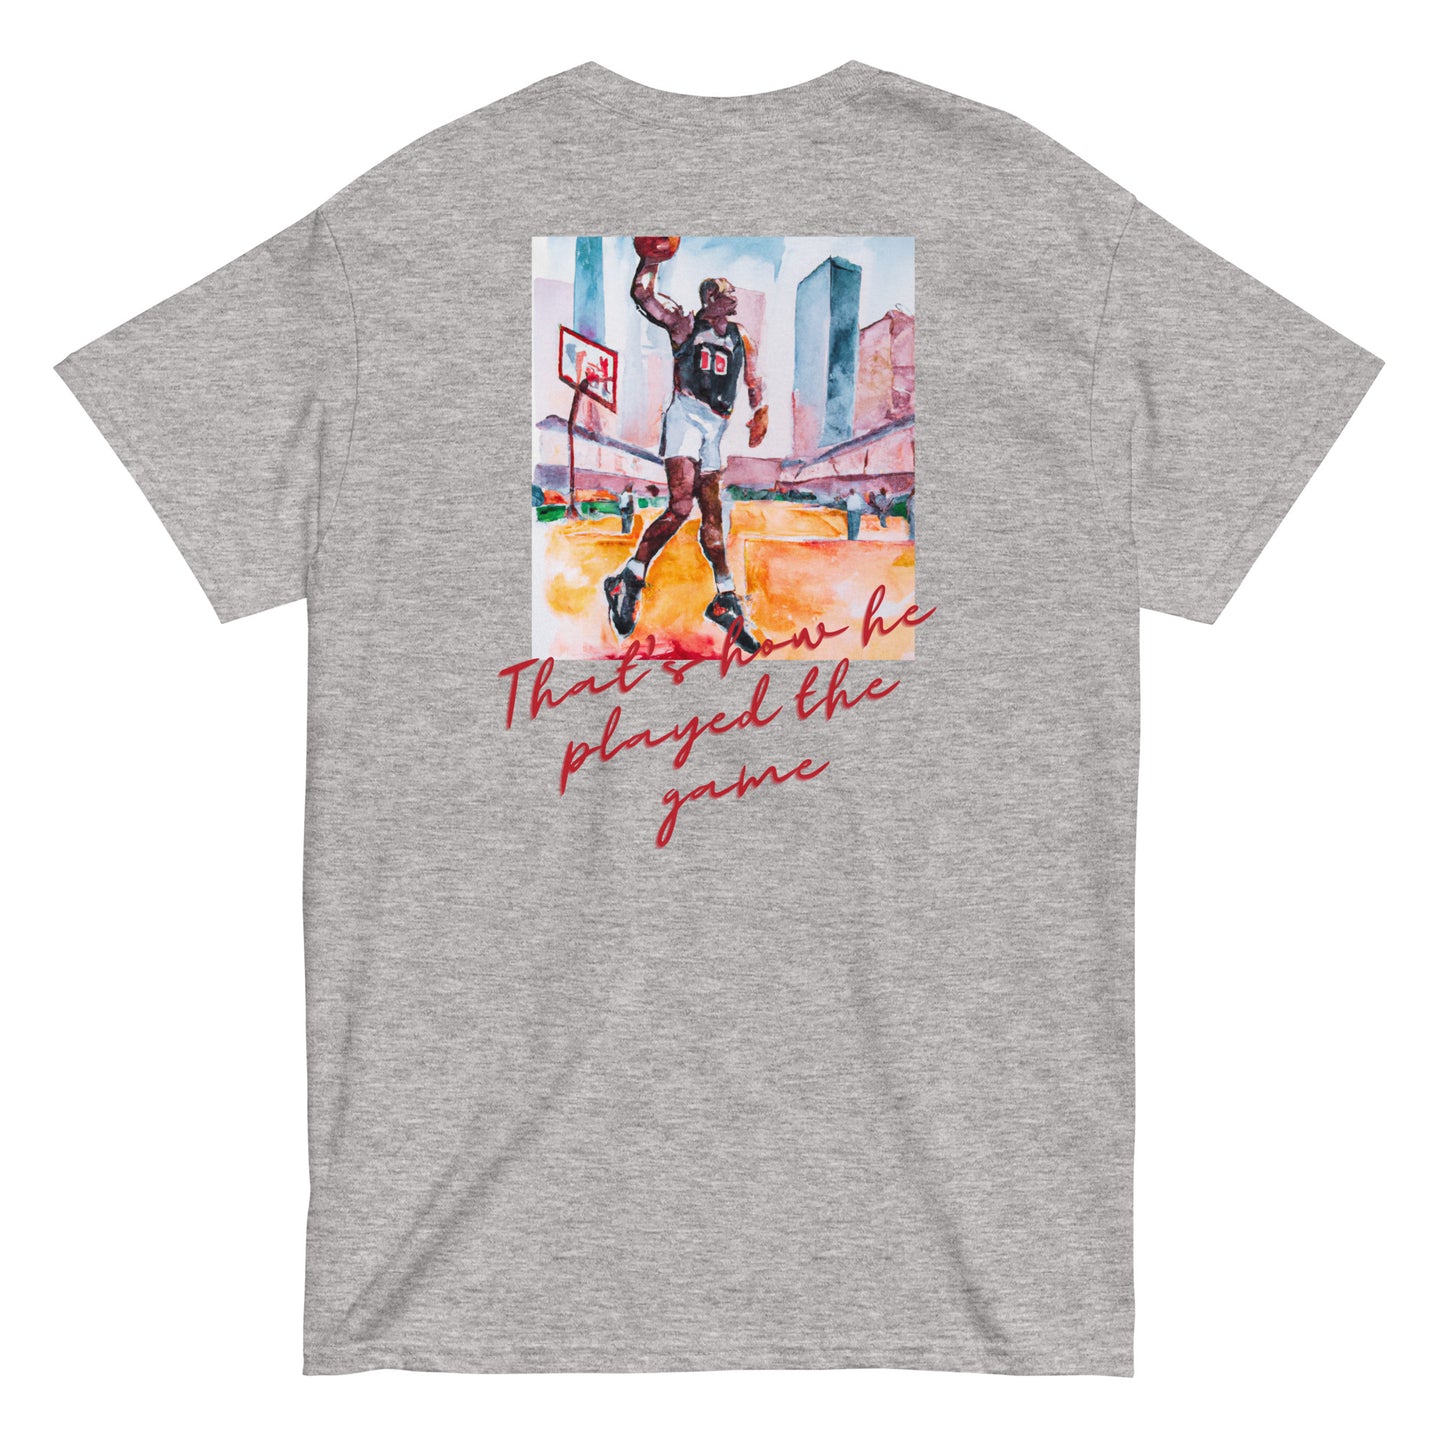 “That's How He Played The Game” Embroidered T-shirt - Gray